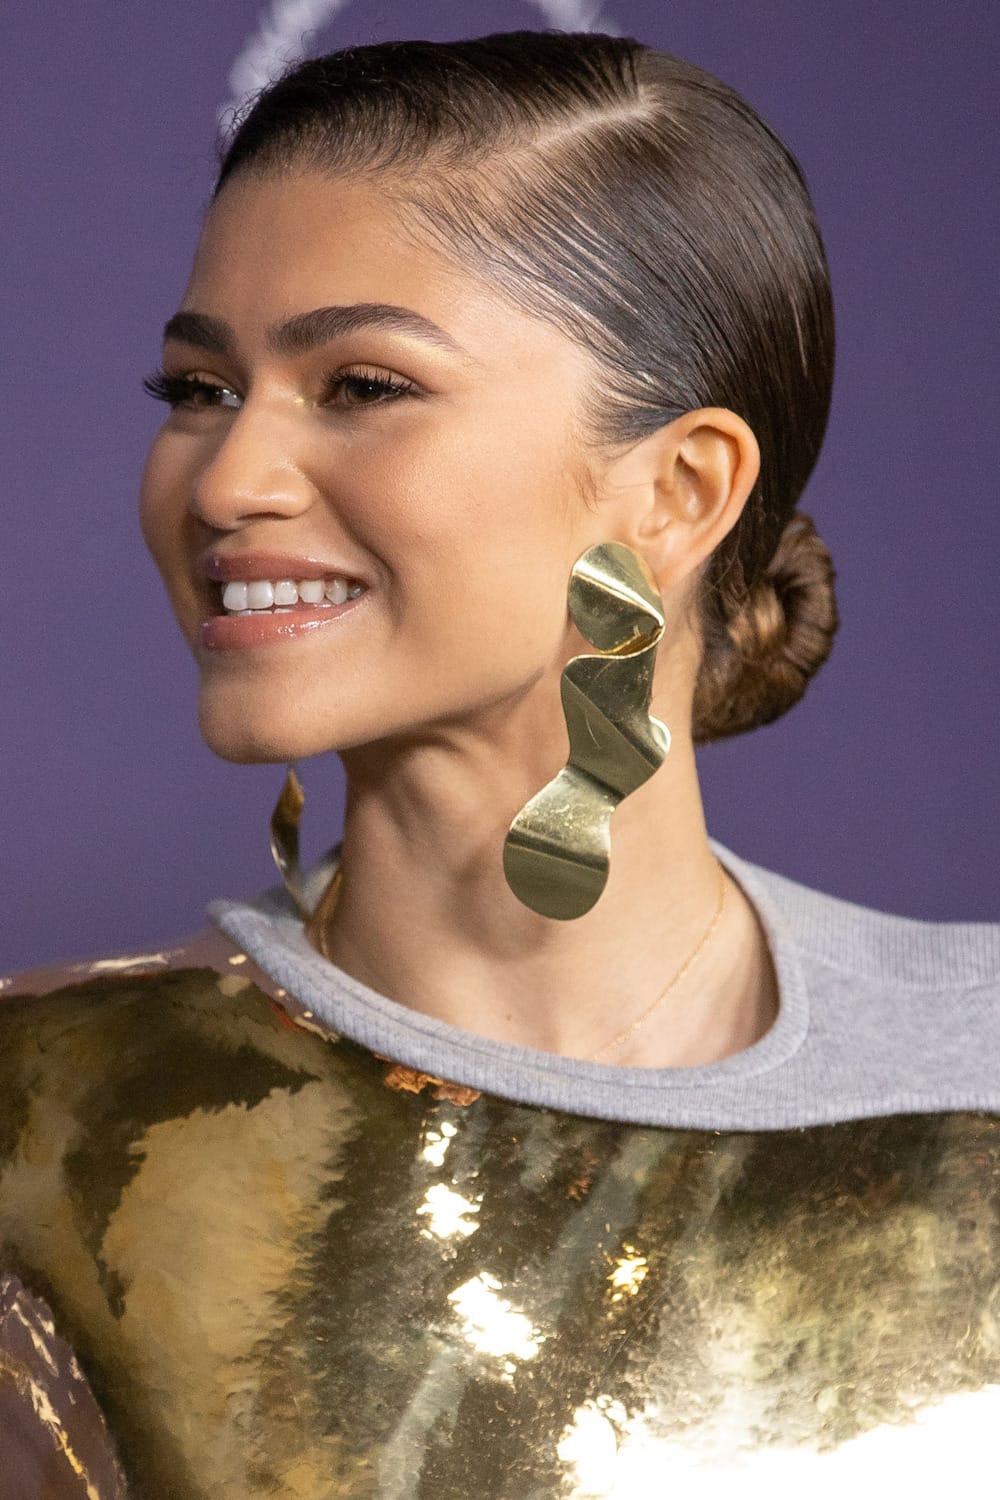 Zendaya Coleman walked the red carpet of Women in Film’s Annual Award Ceremony held at The Academy Museum of Motion Pictures in Los Angeles, California on October 6, 2021.